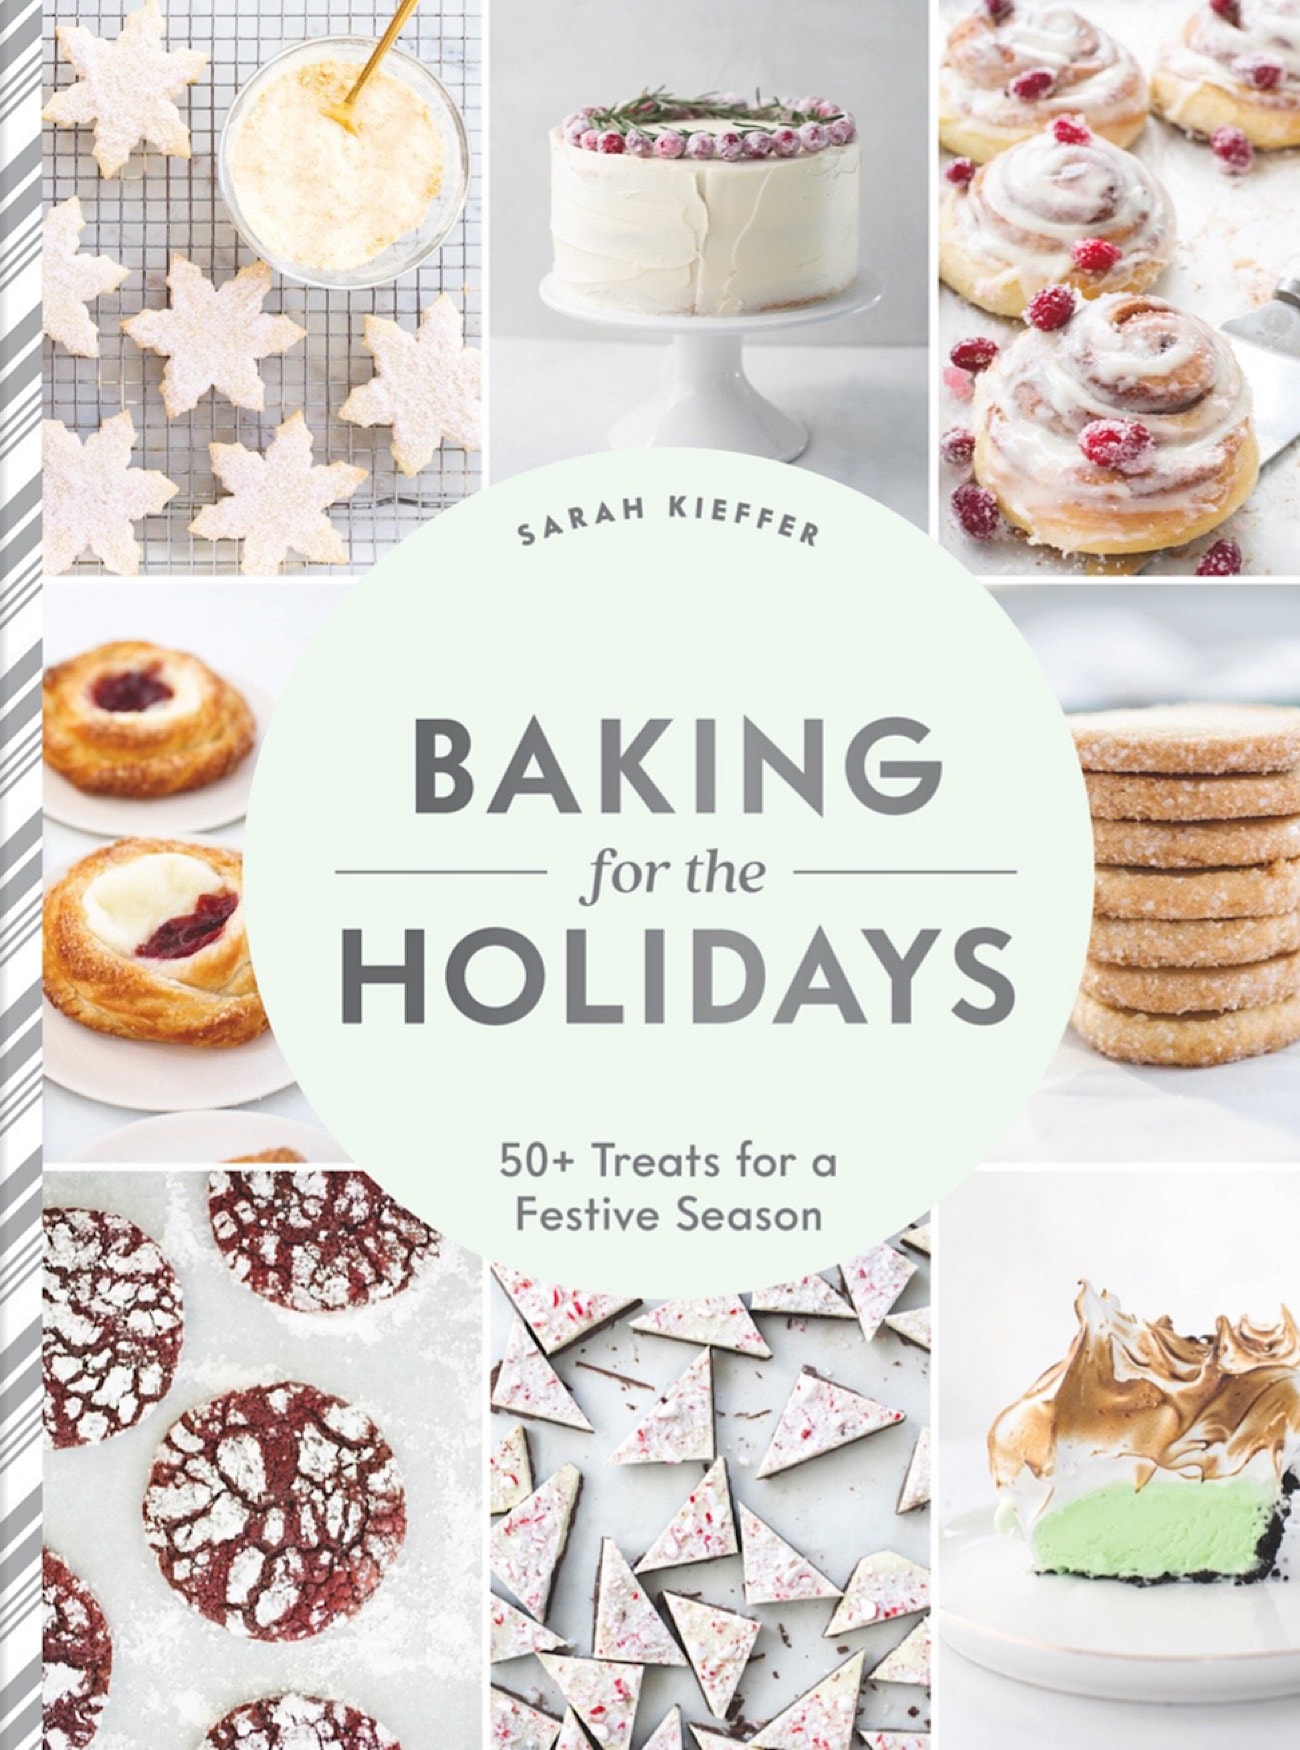 Baking for the Holidays cookbook cover